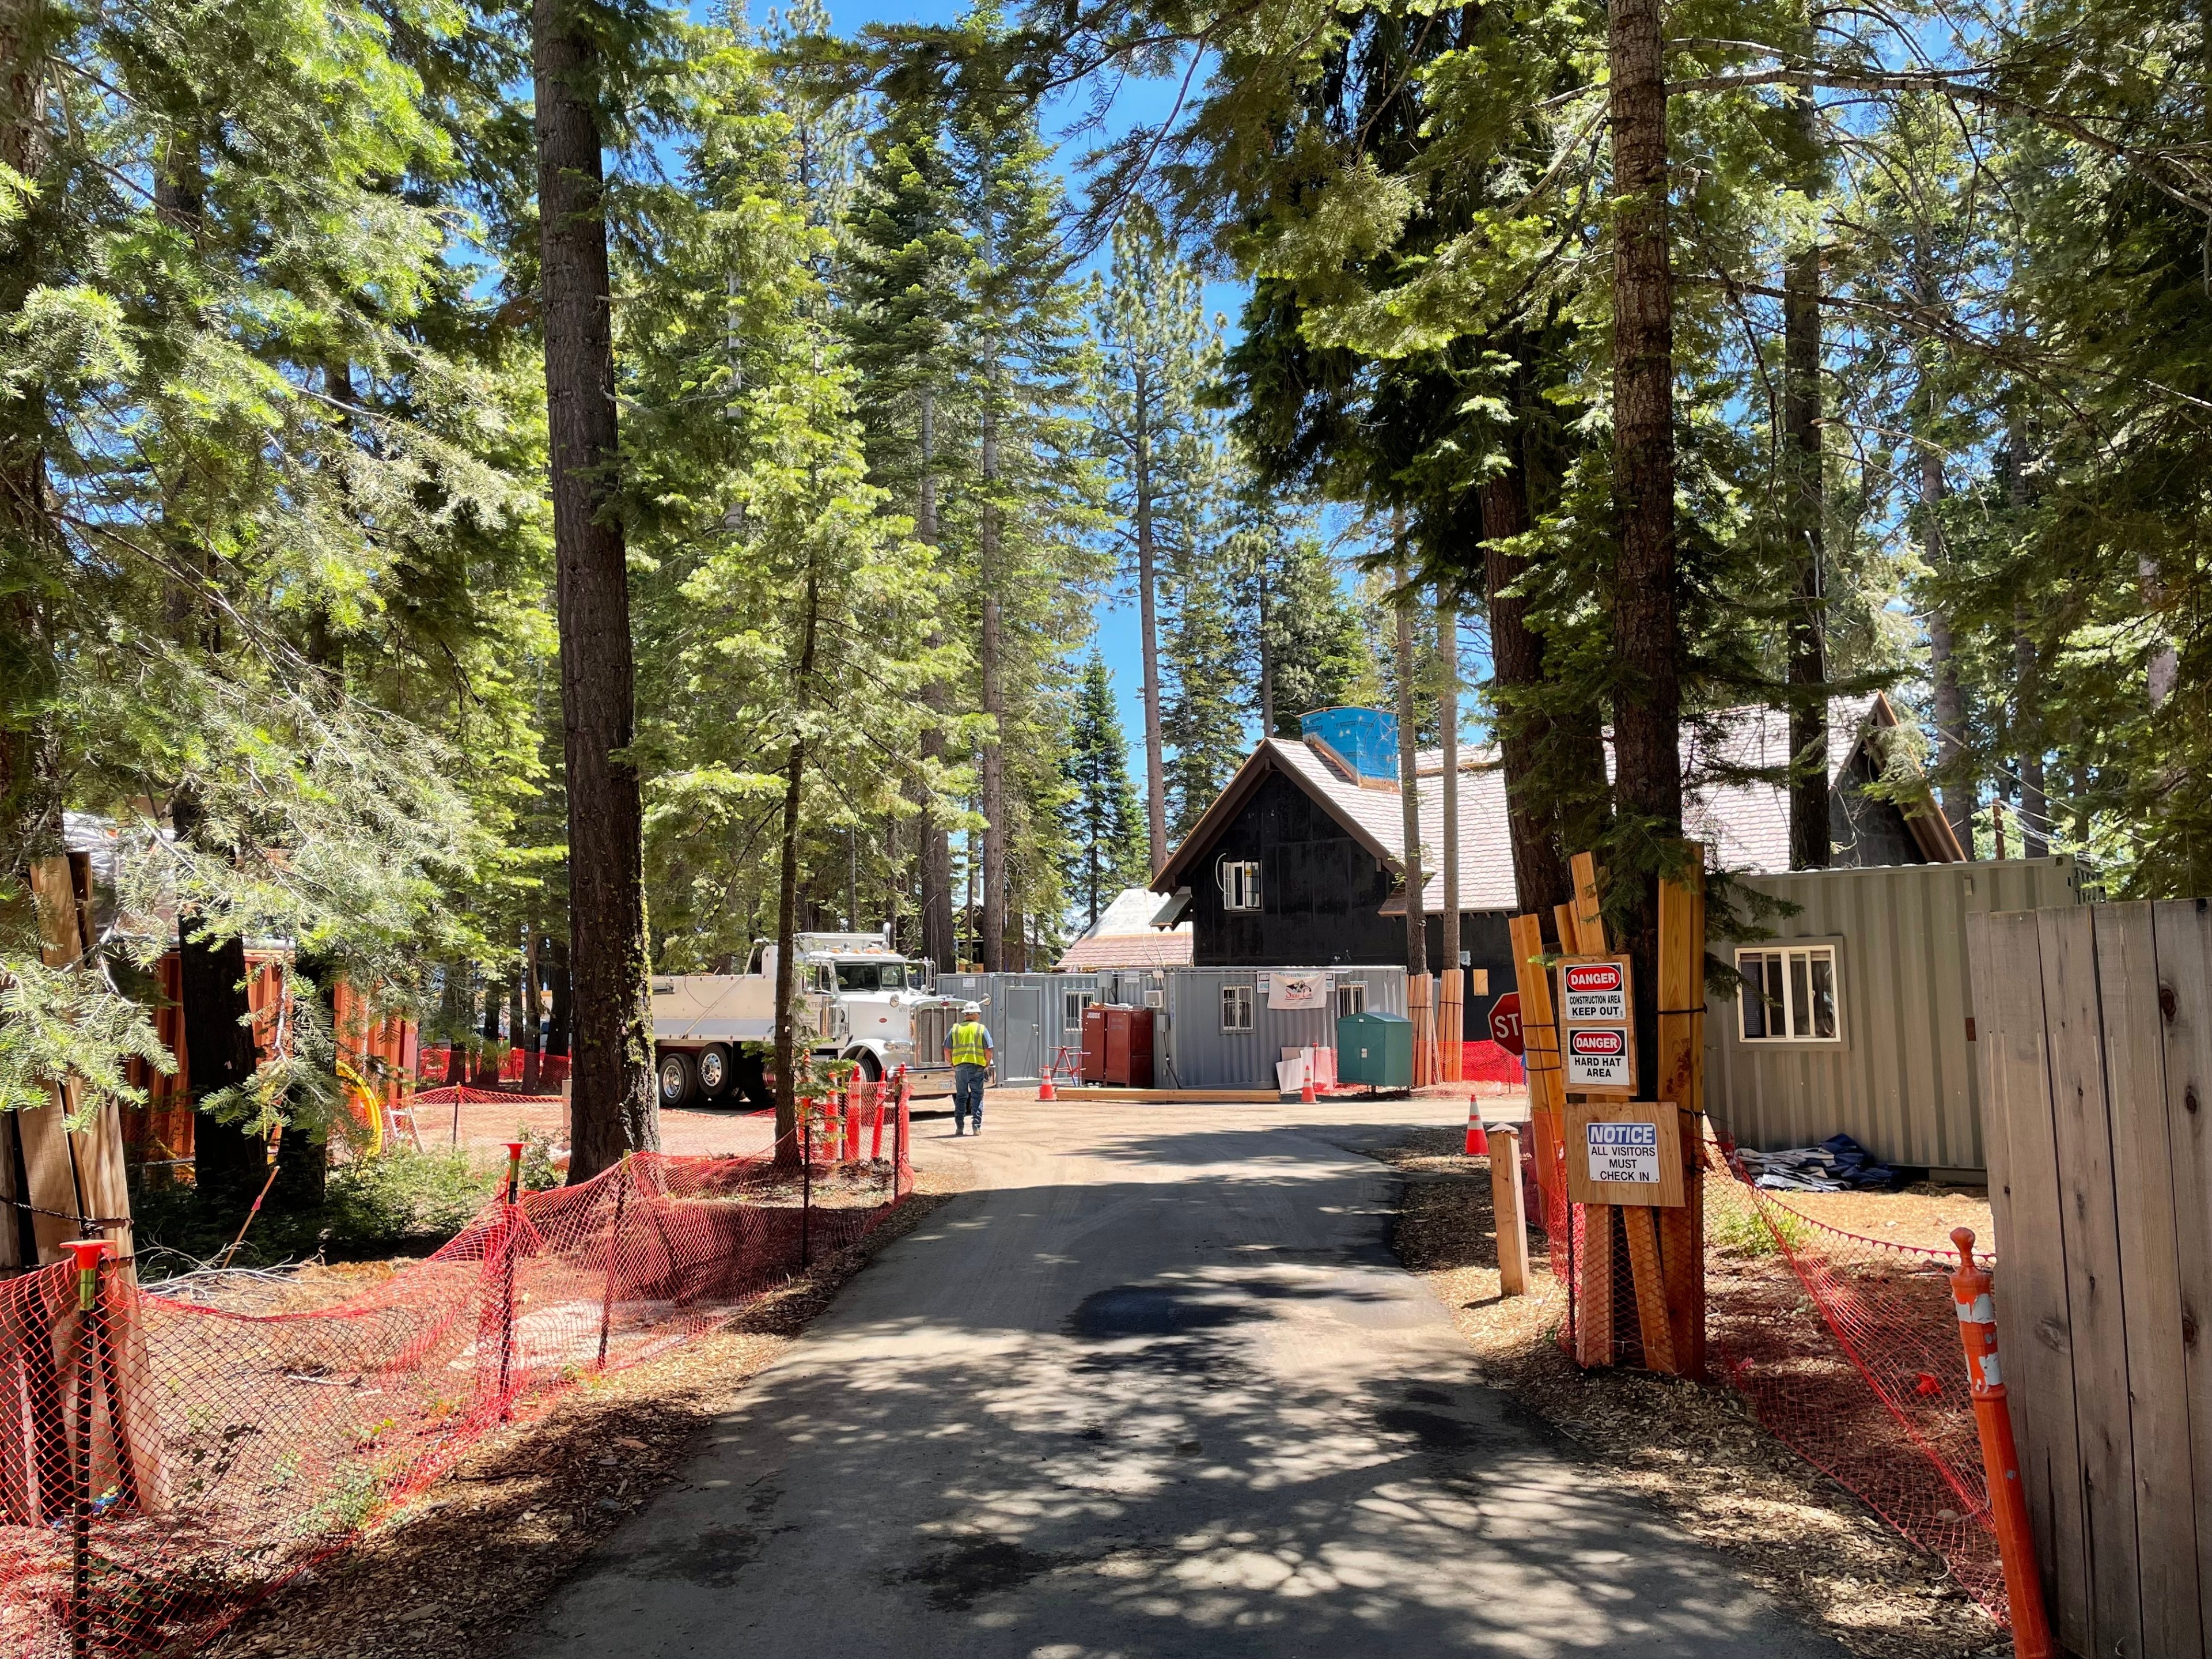 A wooded construction site features scattered homes, a parked truck, red safety fencing, various signs, and a clear sunny sky.